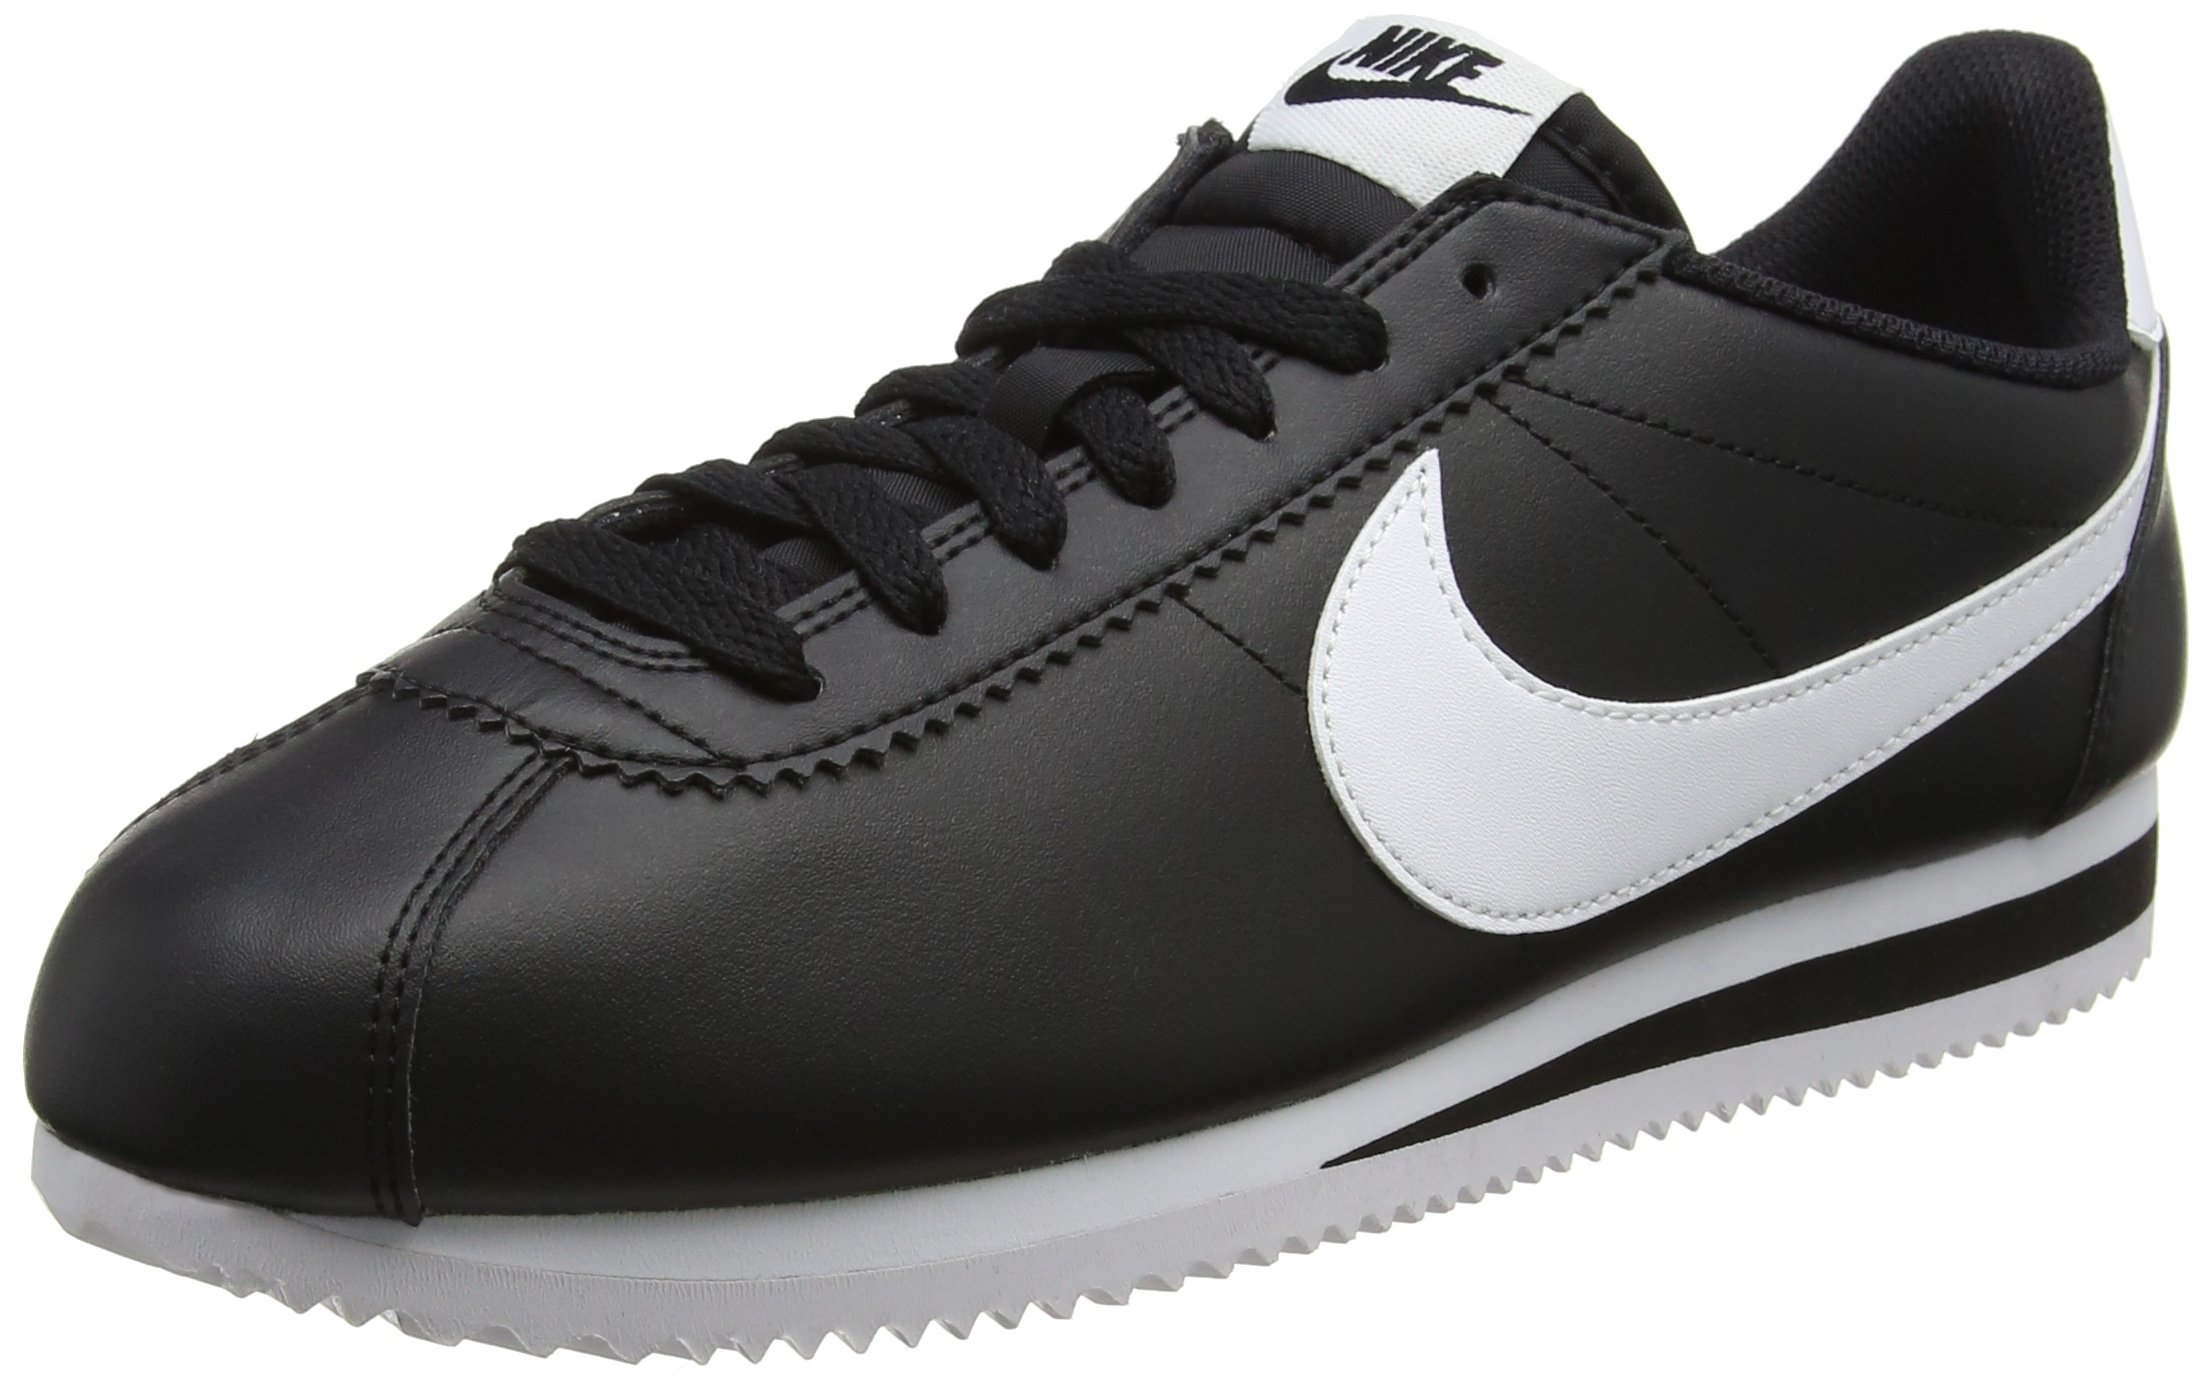 Nike Classic Cortez Leather Women's Low-Top Ladies Trainers Tennis